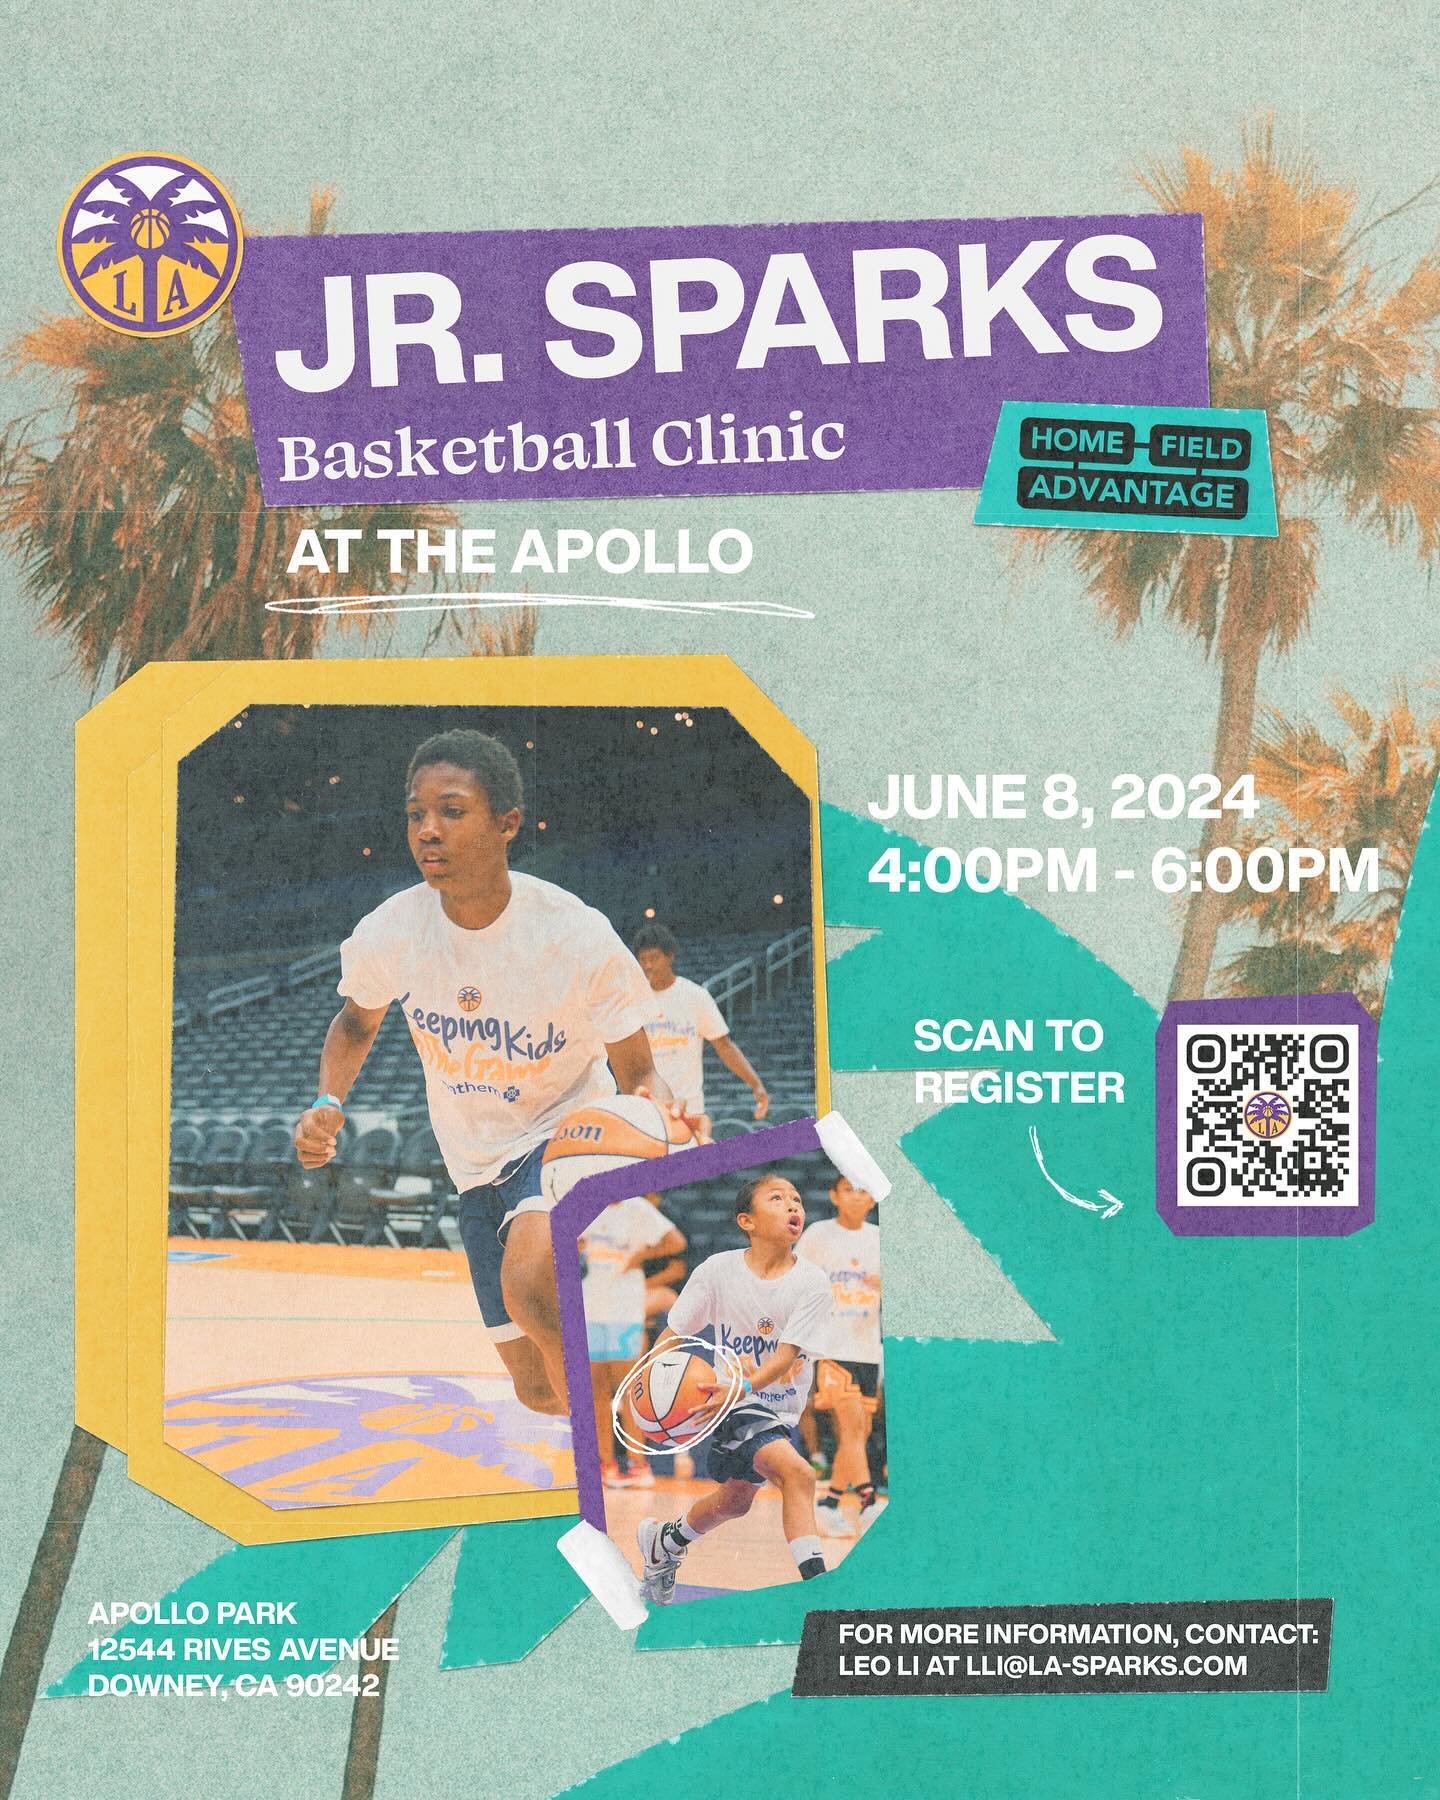 Home Field Advantage is partnering with LA Sparks! 🏀🥳🌴

Join us for the JR Sparks Basketball Clinic tailored for beginners and intermediate, where boys and girls will hone their skills and ignite their passion for basketball.&nbsp; Our clinic focu